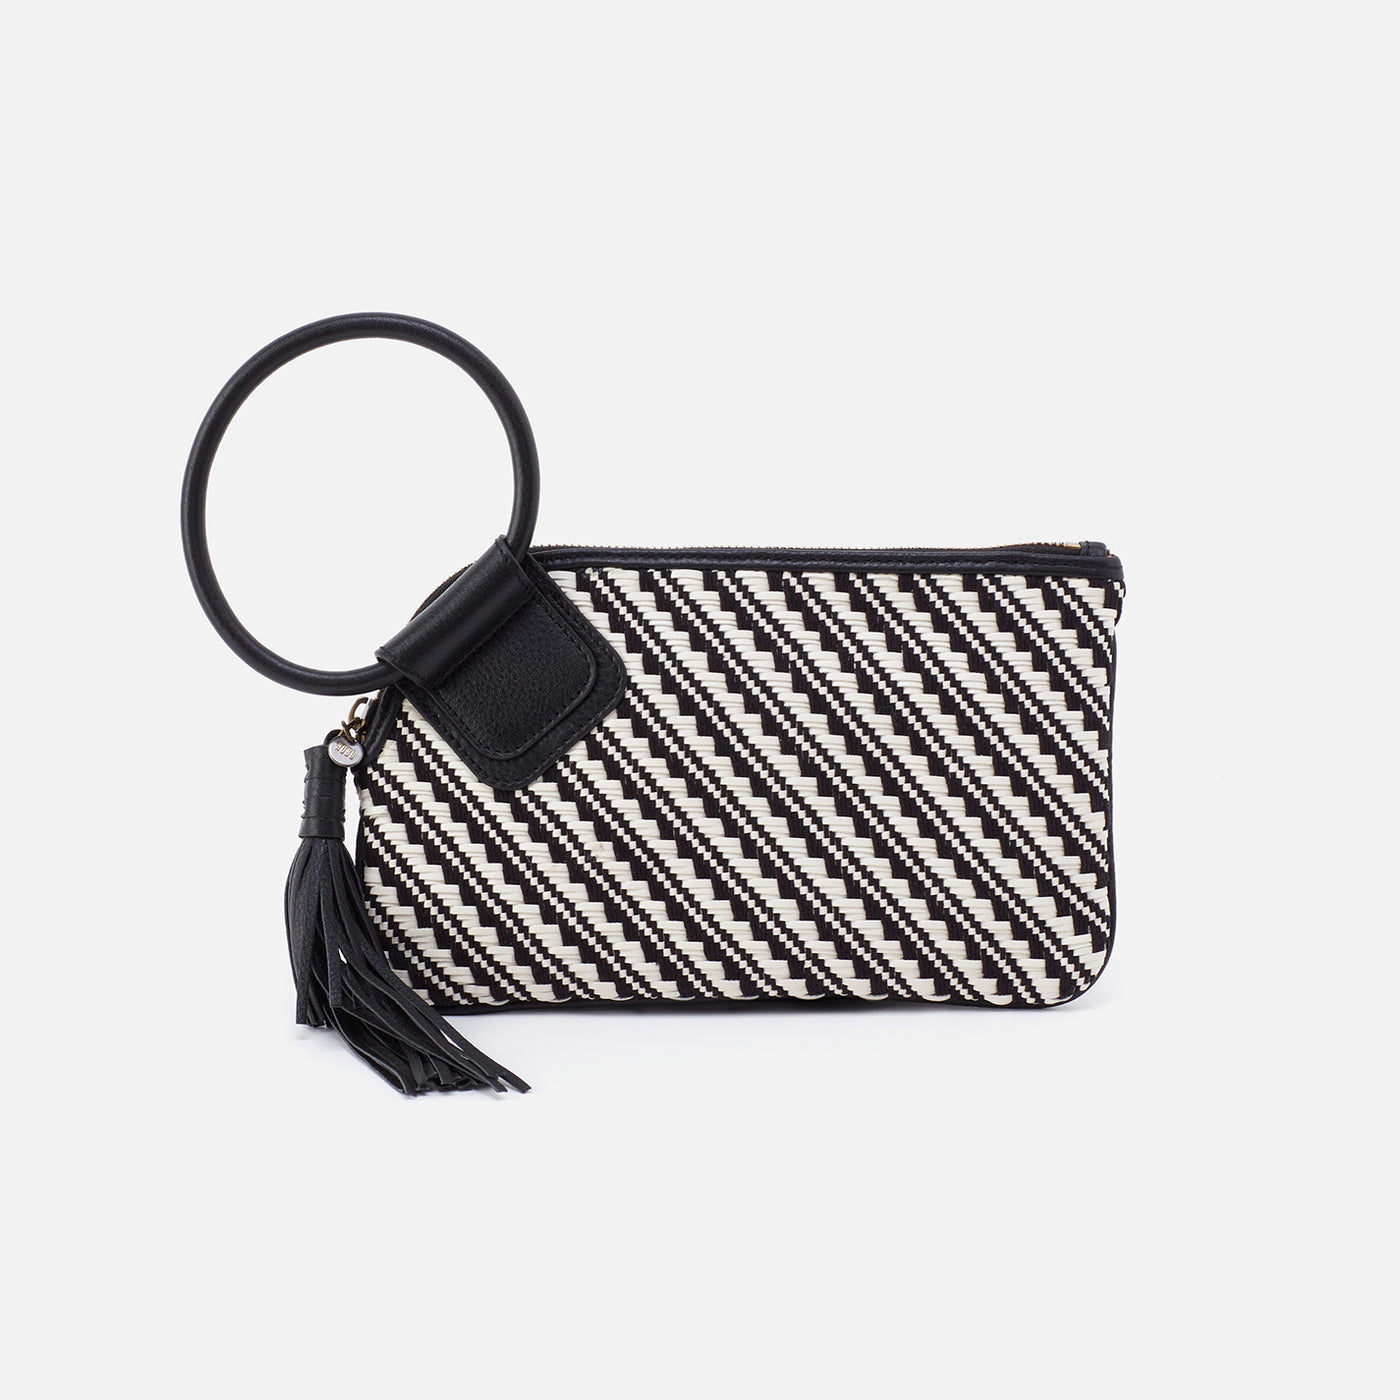 Sable Wristlet in Artisan Weave - Black and White